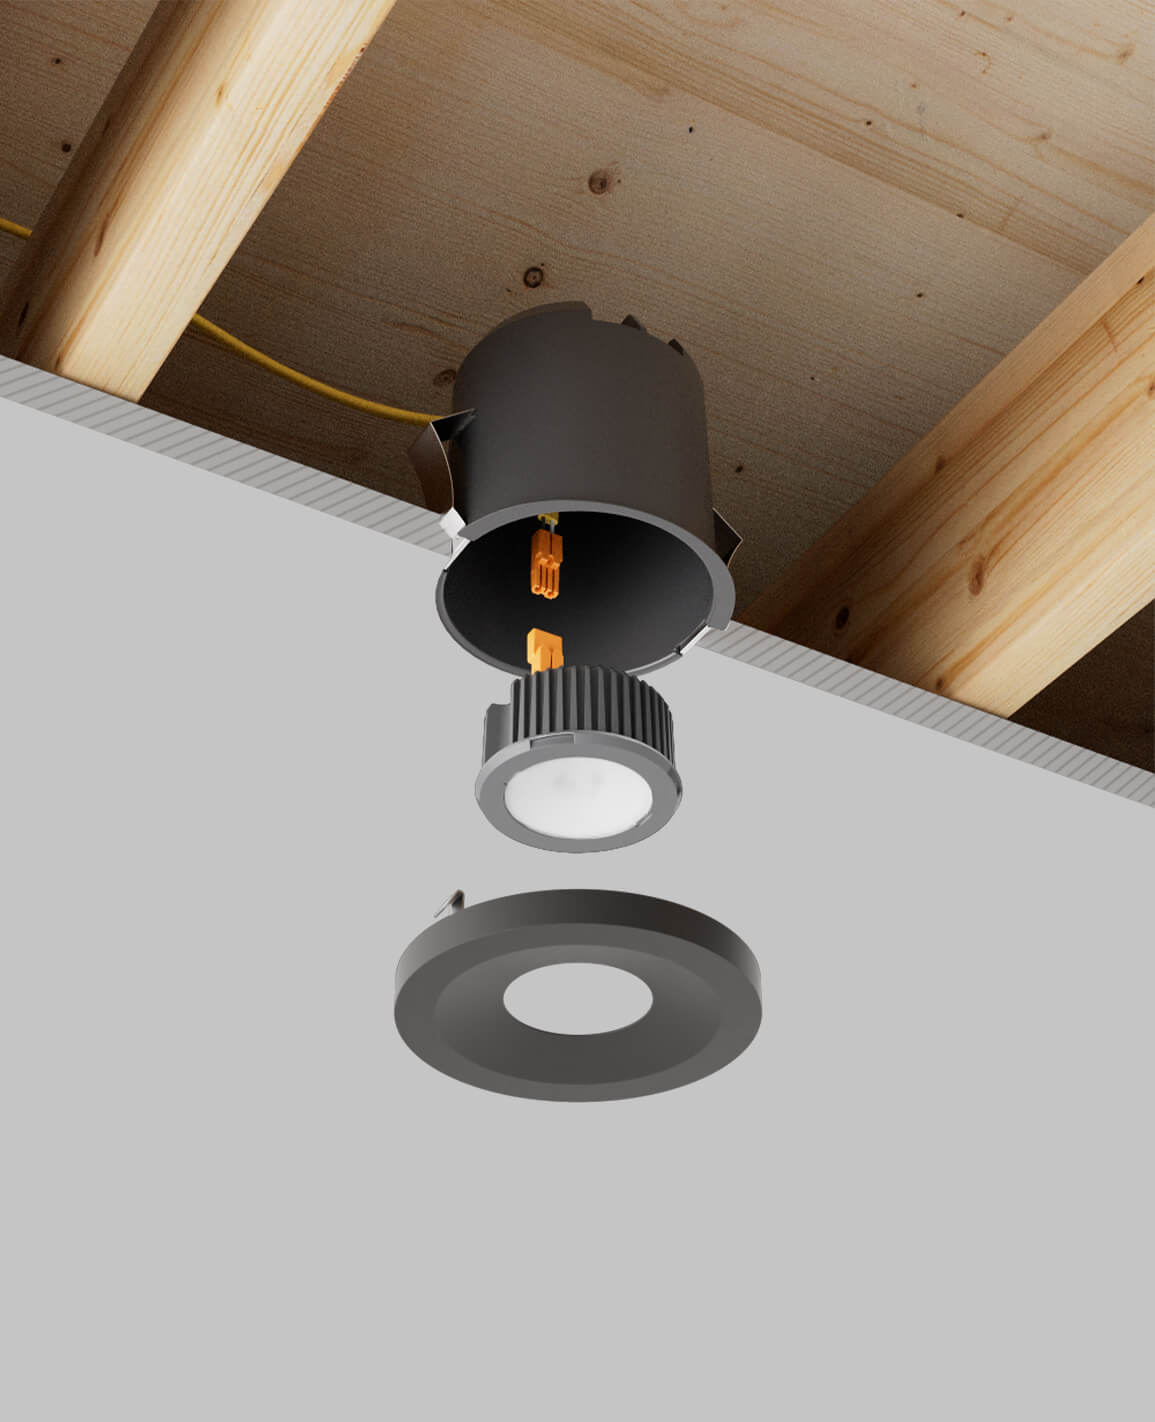 4" LUSA recessed light with remodel housing and black surface trim